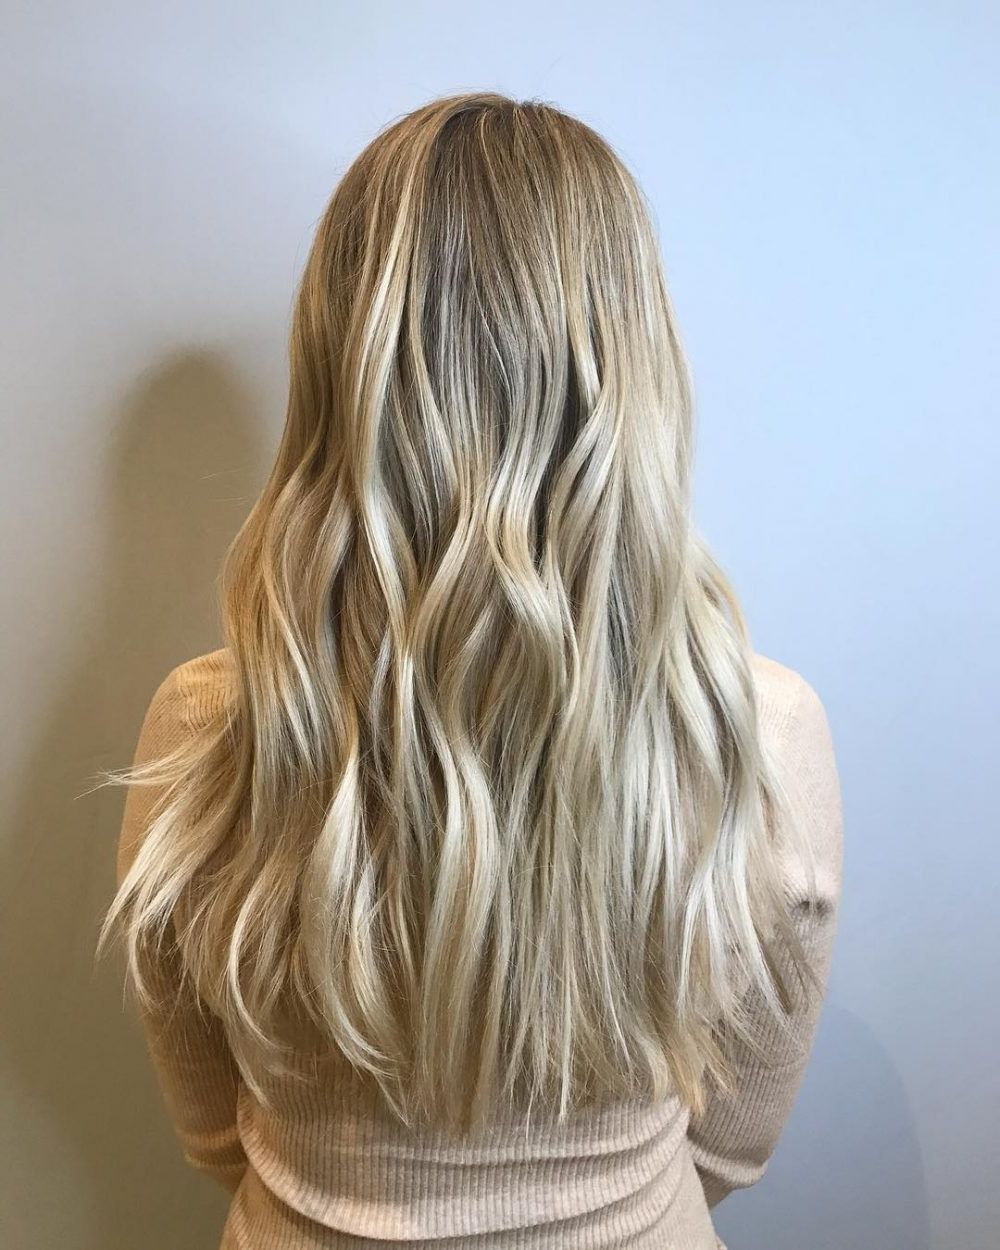 Well Known Sandy Blonde Hairstyles Inside 30 Top Long Blonde Hair Ideas – Bombshell Alert! (View 7 of 20)